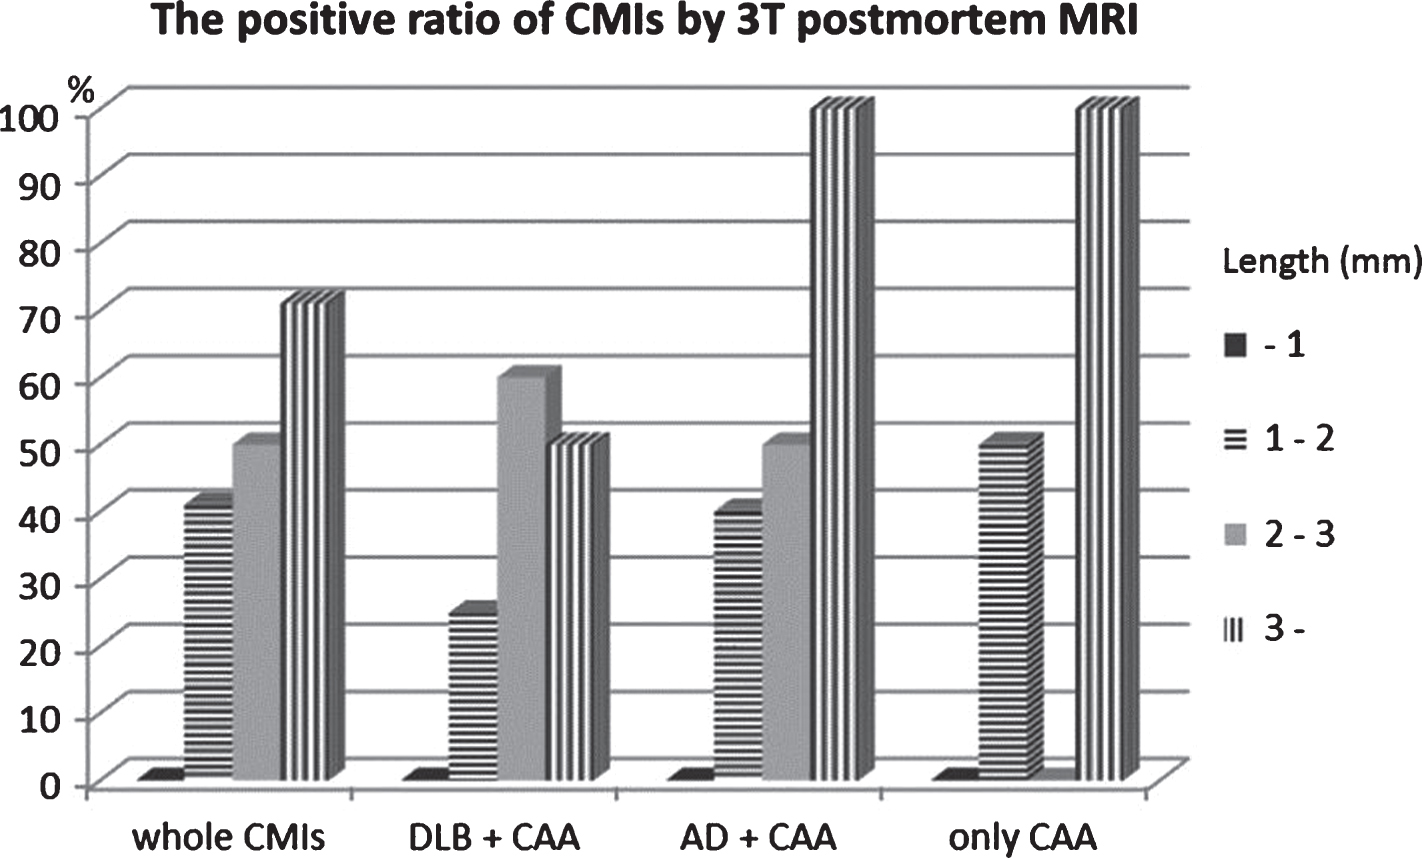 Size distribution of the detection ratio of CMIs with postmortem 3T MRI. With only CAA or CAA complicated with Lewy body disease or Alzheimer’s disease, the positive ratio of CMIs is almost the same. CMIs of about 2 mm were detected with 3T postmortem MRI, but those less than 1 mm could not be detected. Between 1 and 2 mm, the environmental topography around CMIs in the cerebral gyrus determined whether or not they could be detected. CMIs that were located in complex cortical regions tended to be undetectable.